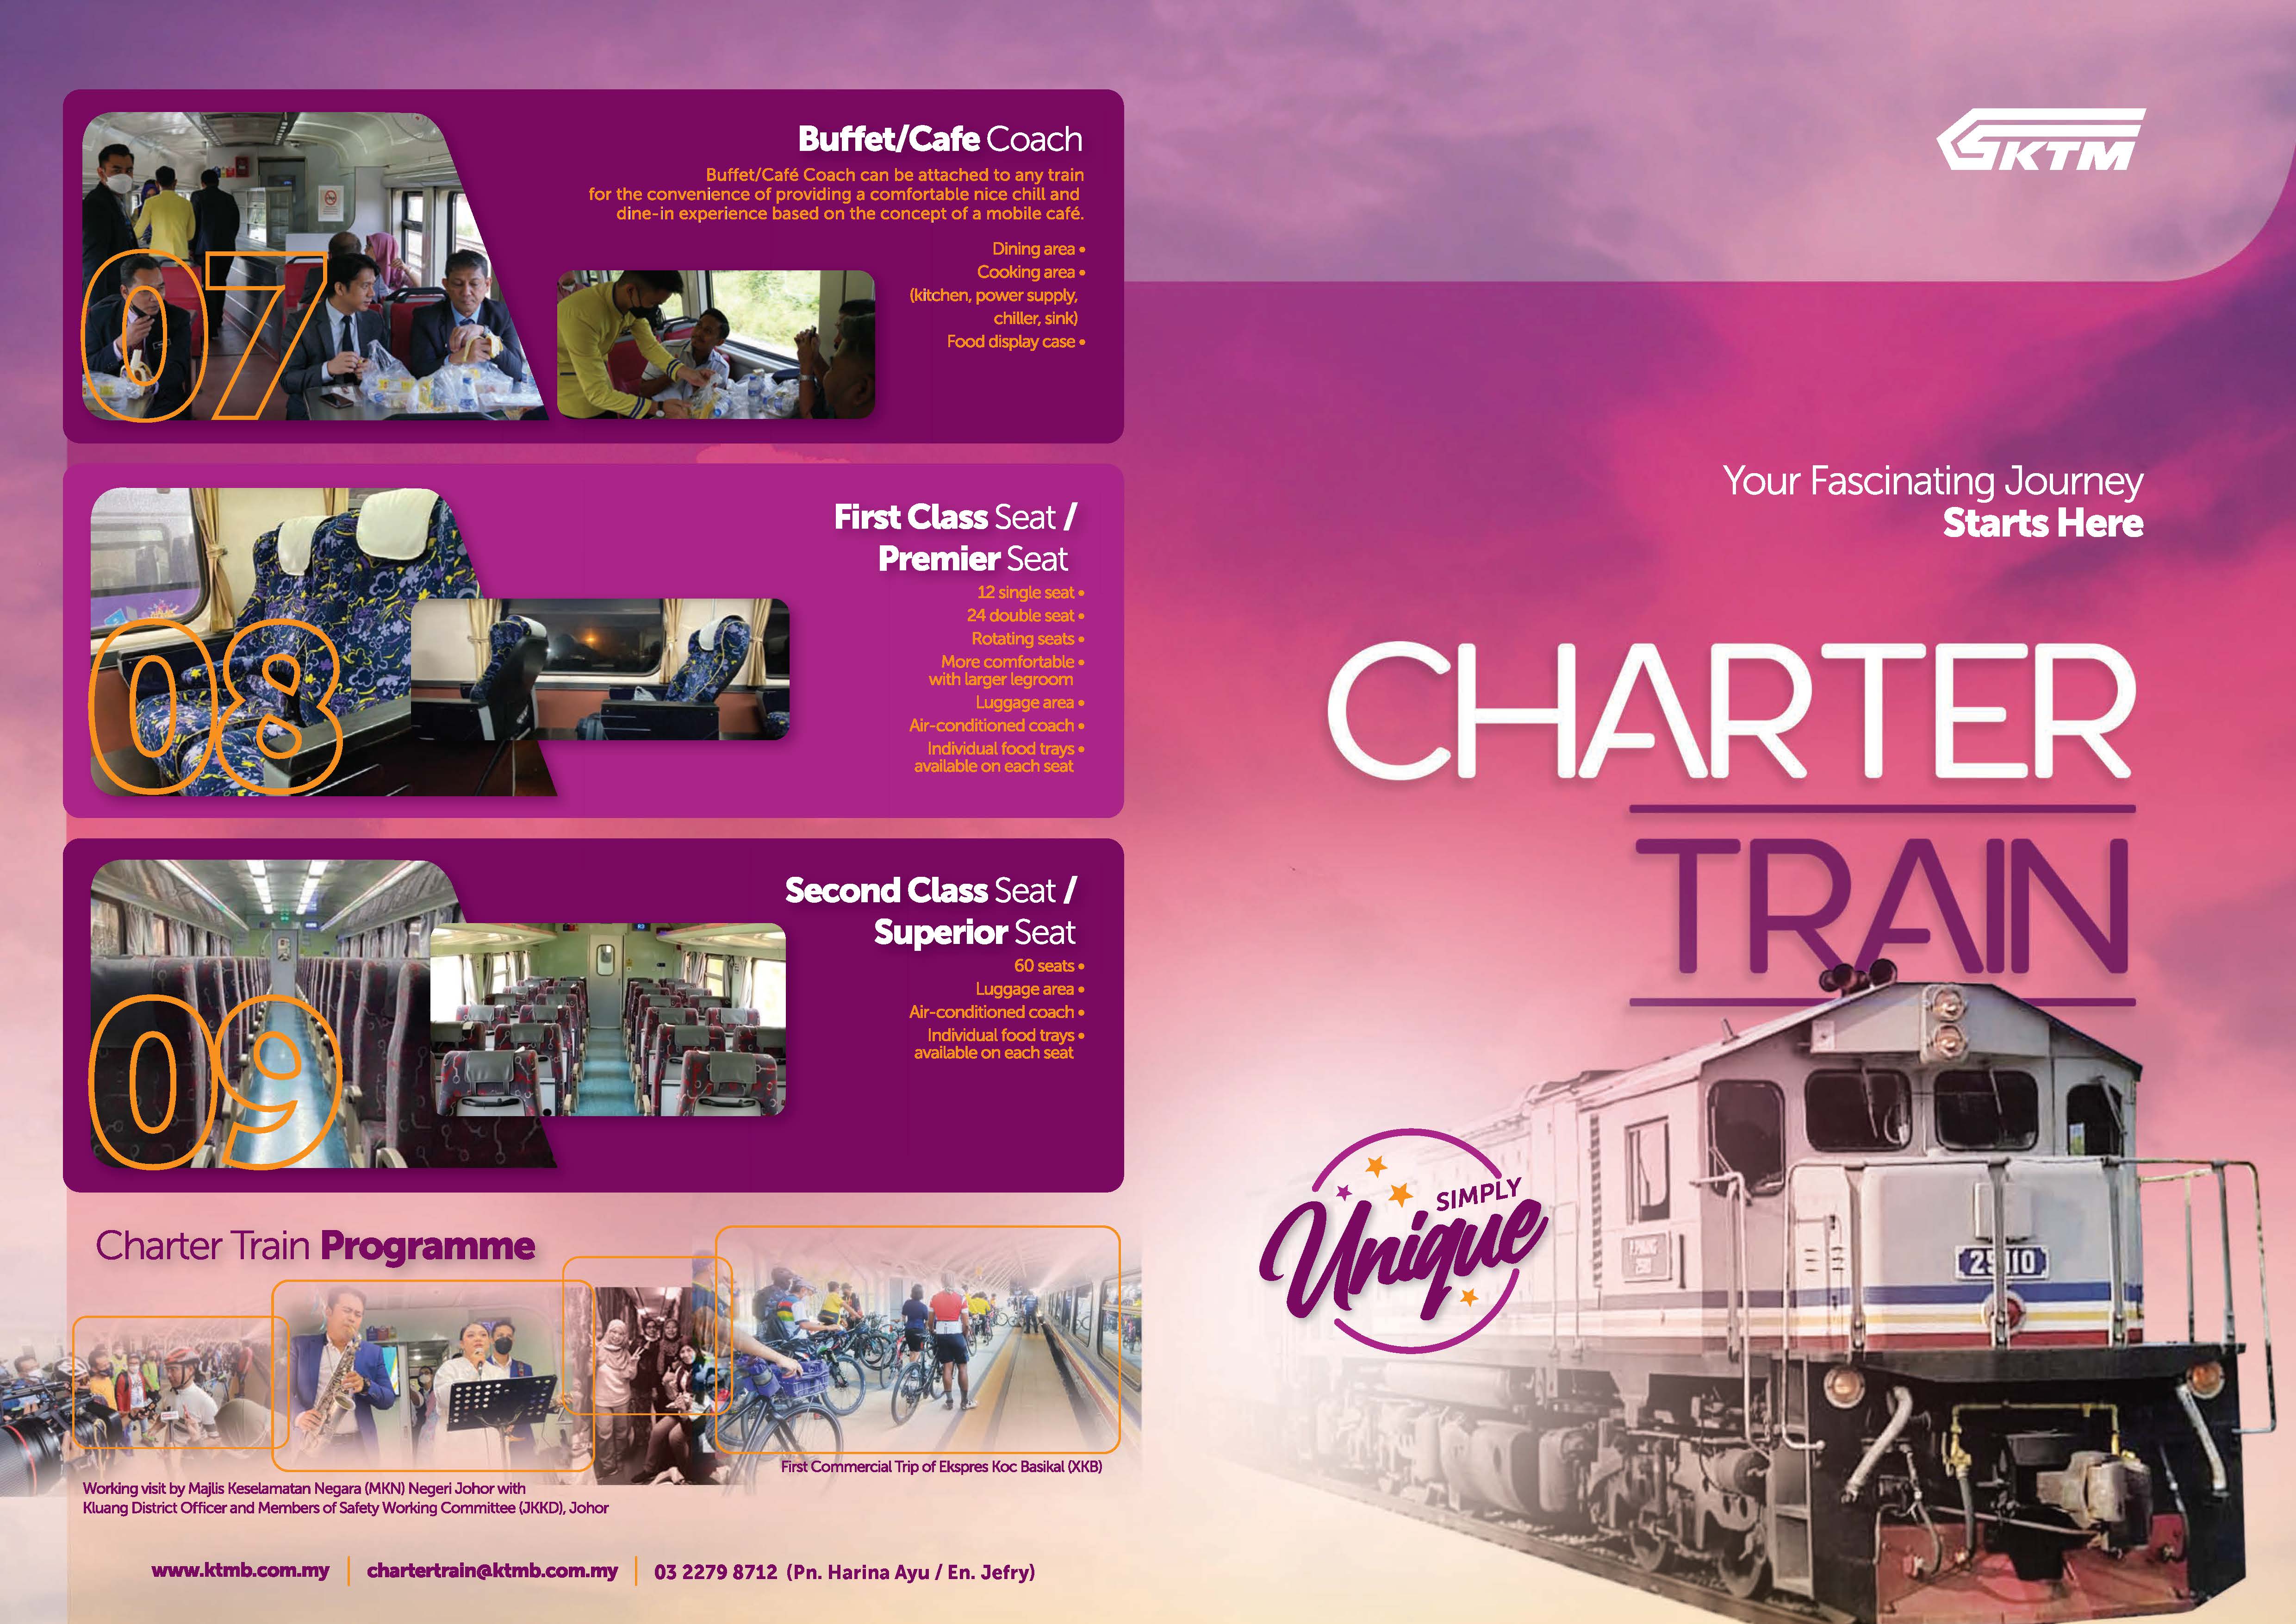 About KTMB Charter Train, Your Fascinating Journey Starts Here, Info 1